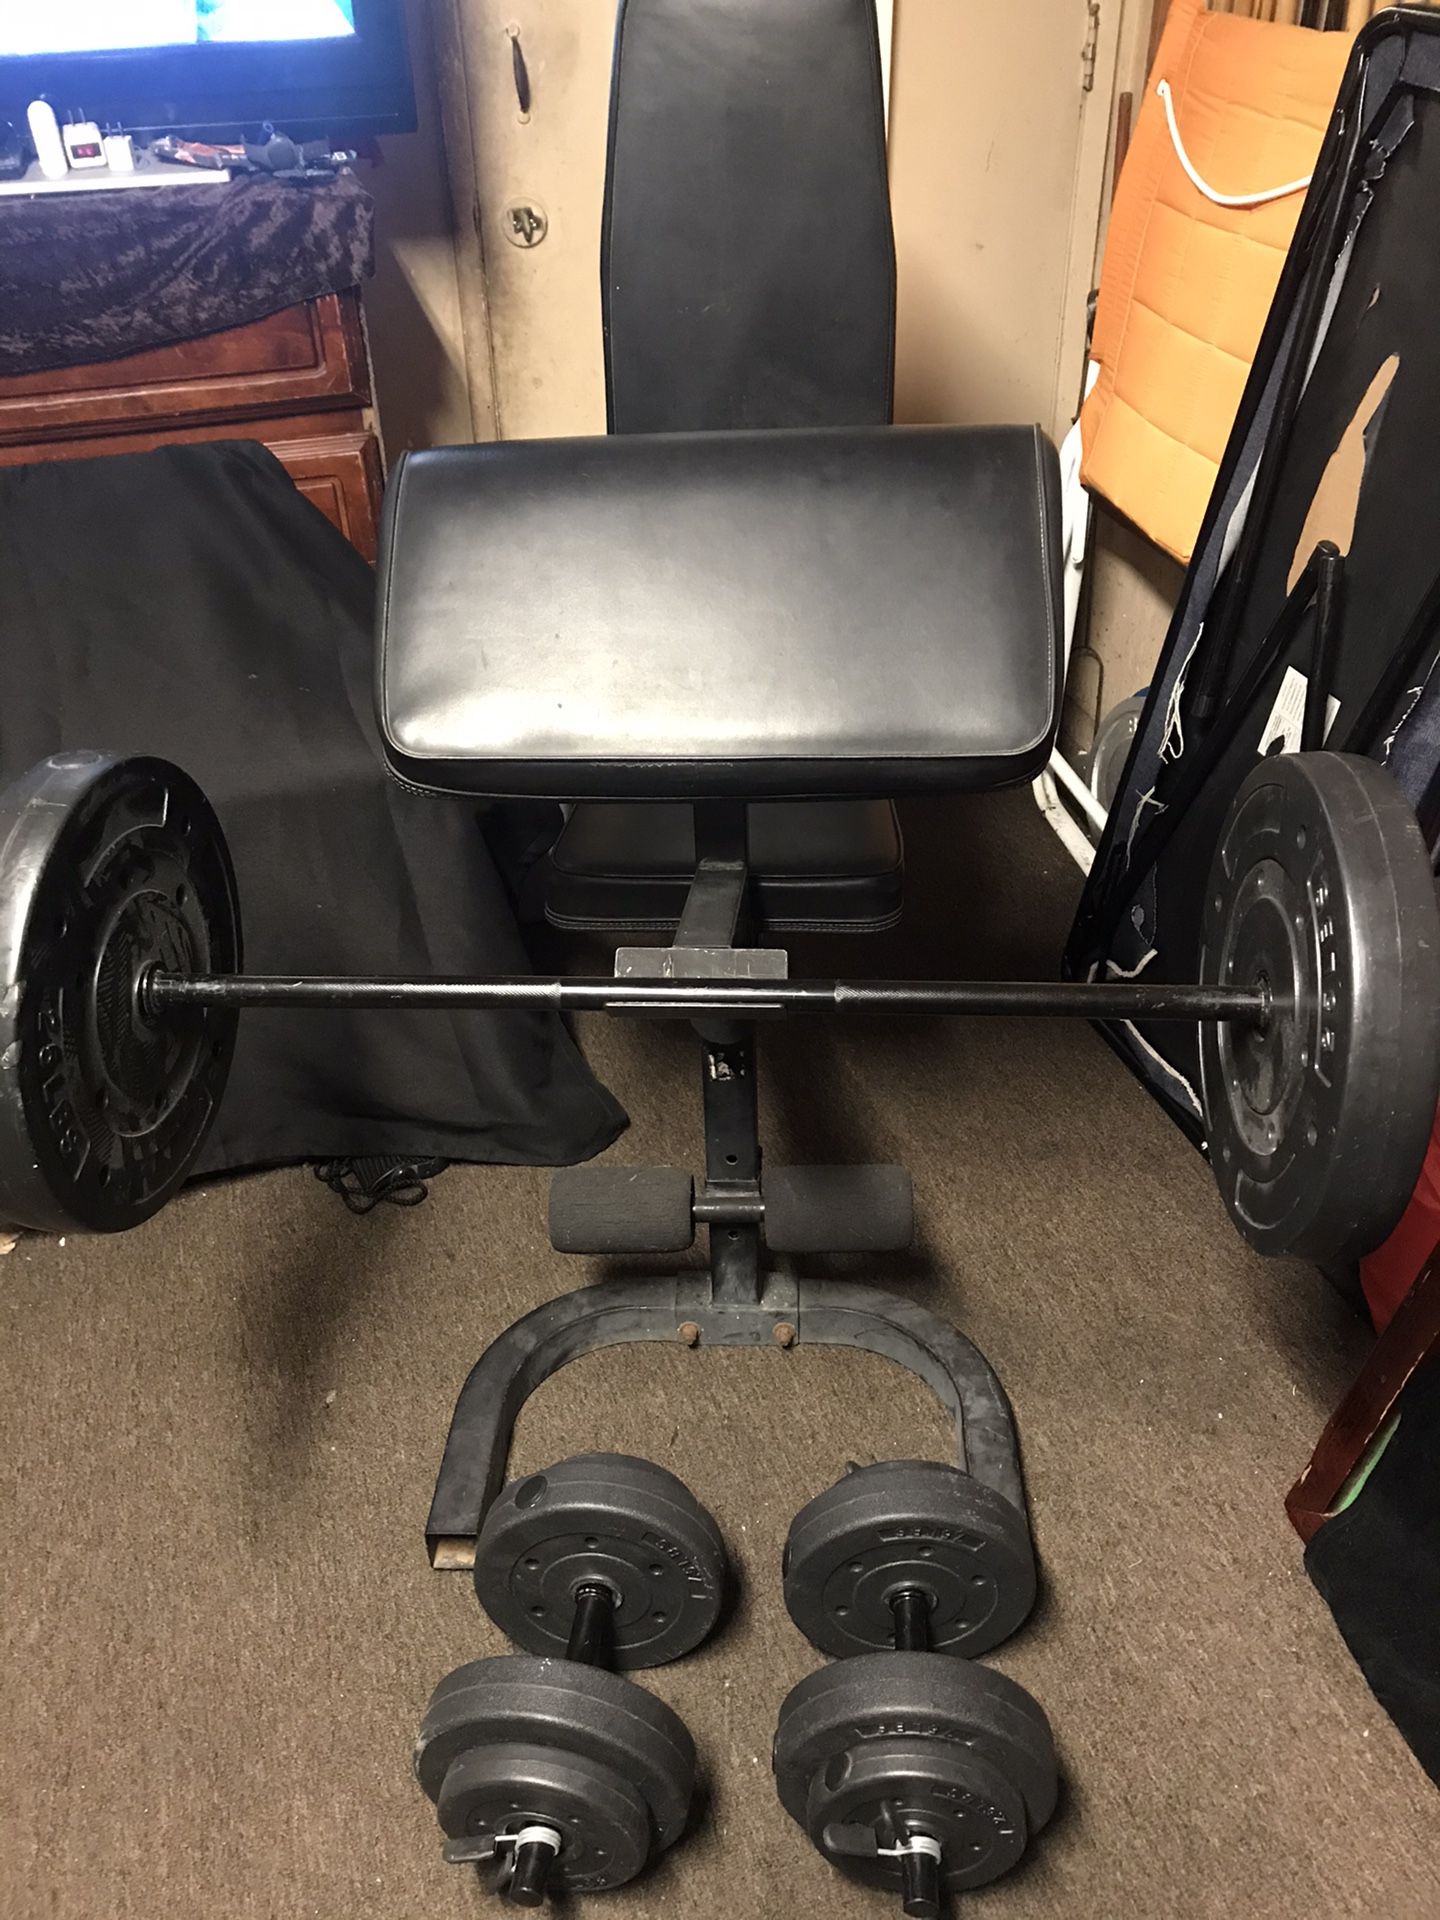 ADJUSTABLE WEIGHT CURL BENCH and DUMBBELLS and BAR is 4ft LONG WEIGHTS